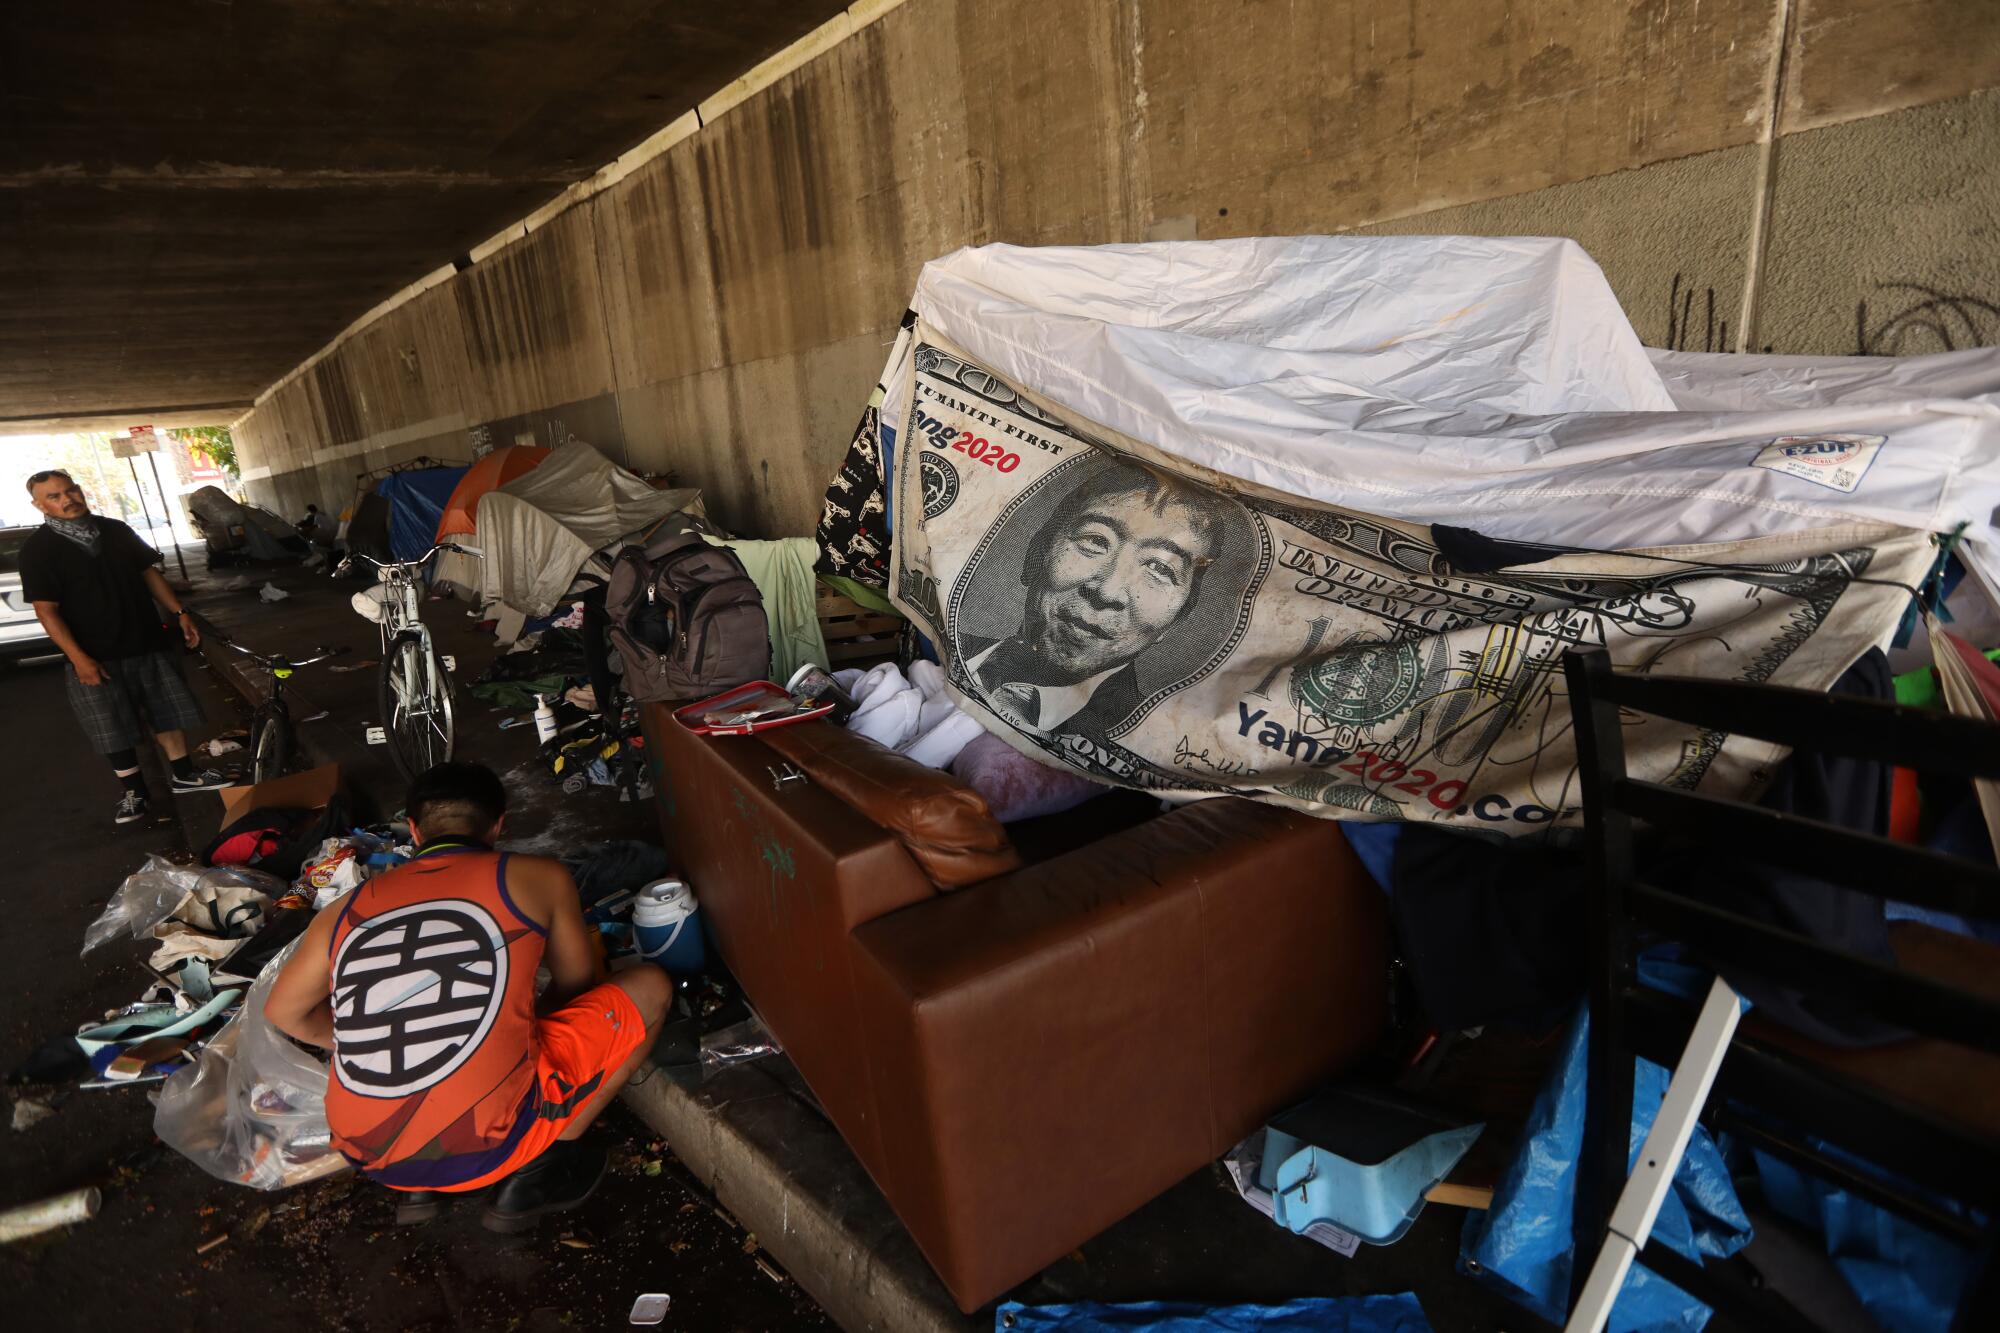 A banner depicting Andrew Yang on a $1,000 bill helps provide shelter in an encampment under the 134 Freeway.